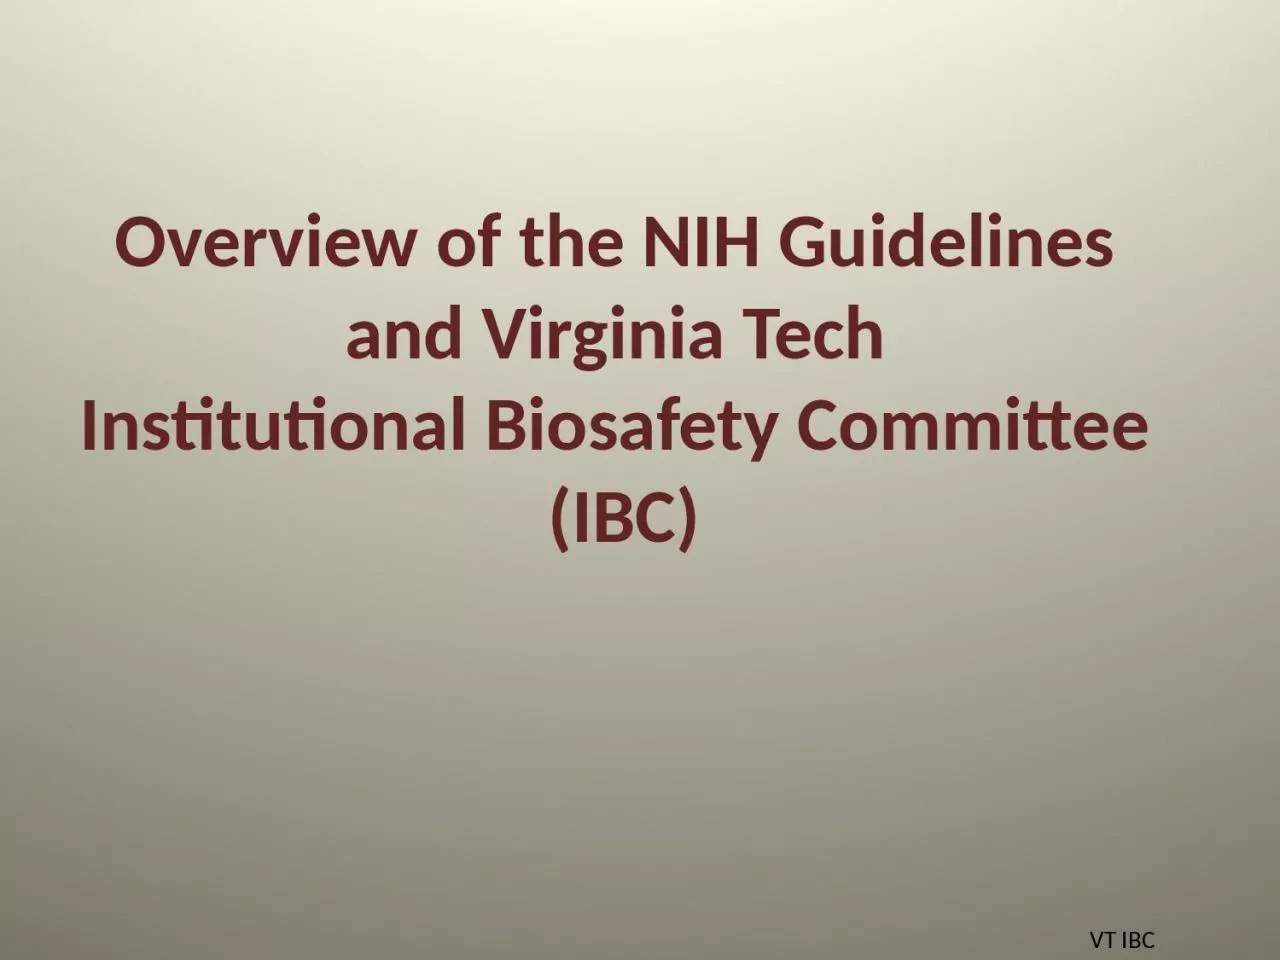 Overview of the NIH Guidelines